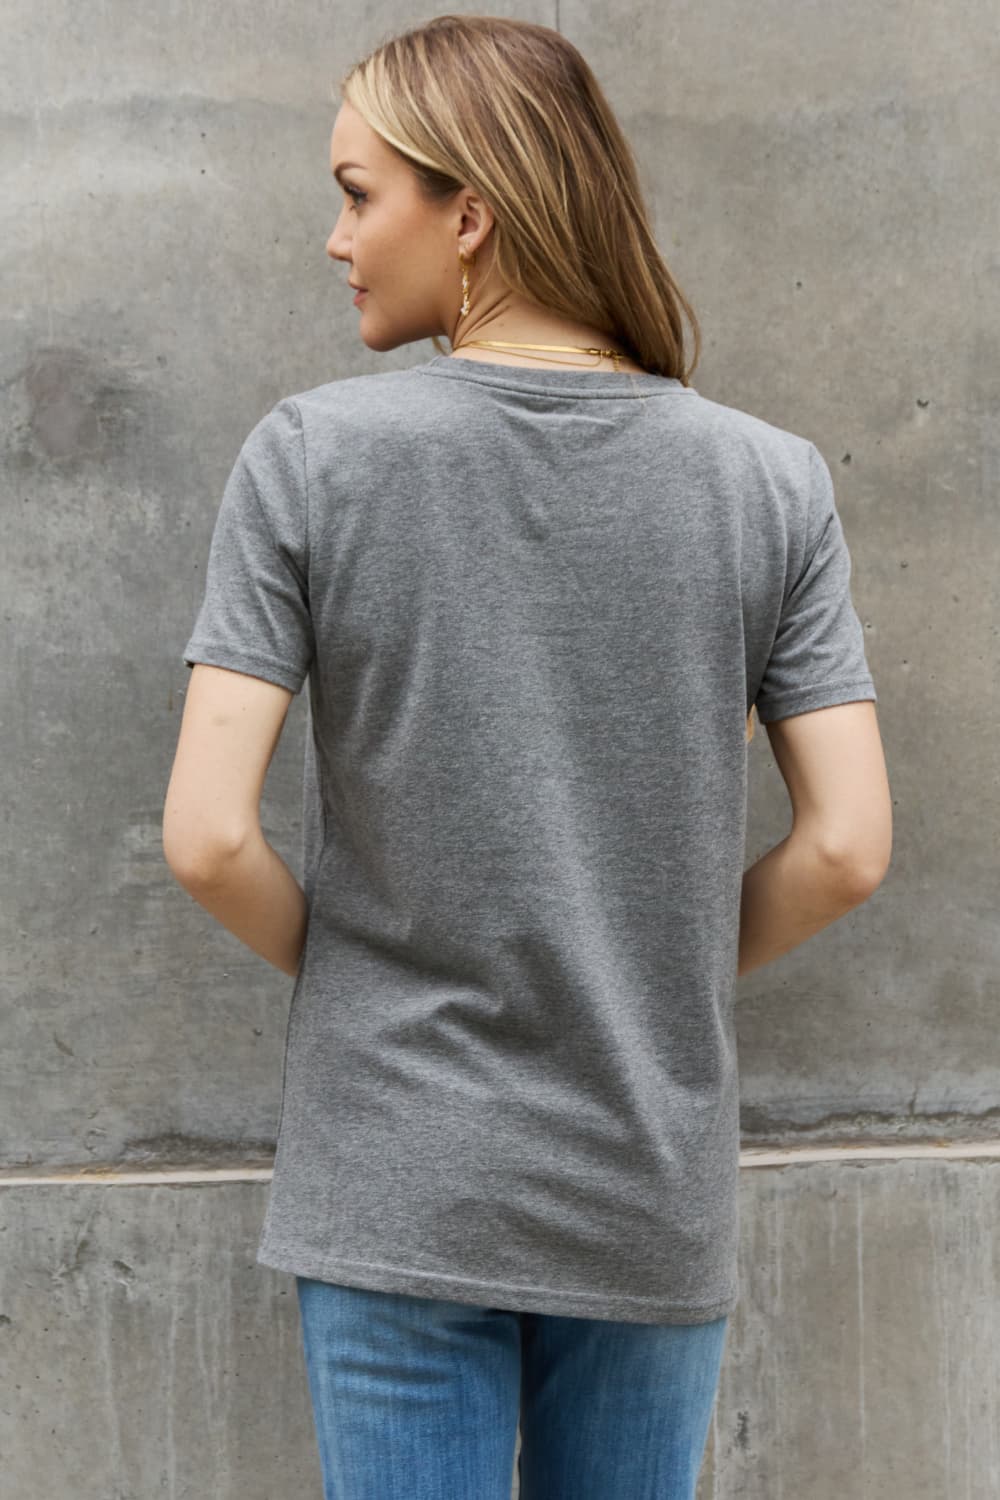 Slate Gray Simply Love Full Size HAVE THE DAY YOU DESERVE Graphic Cotton Tee